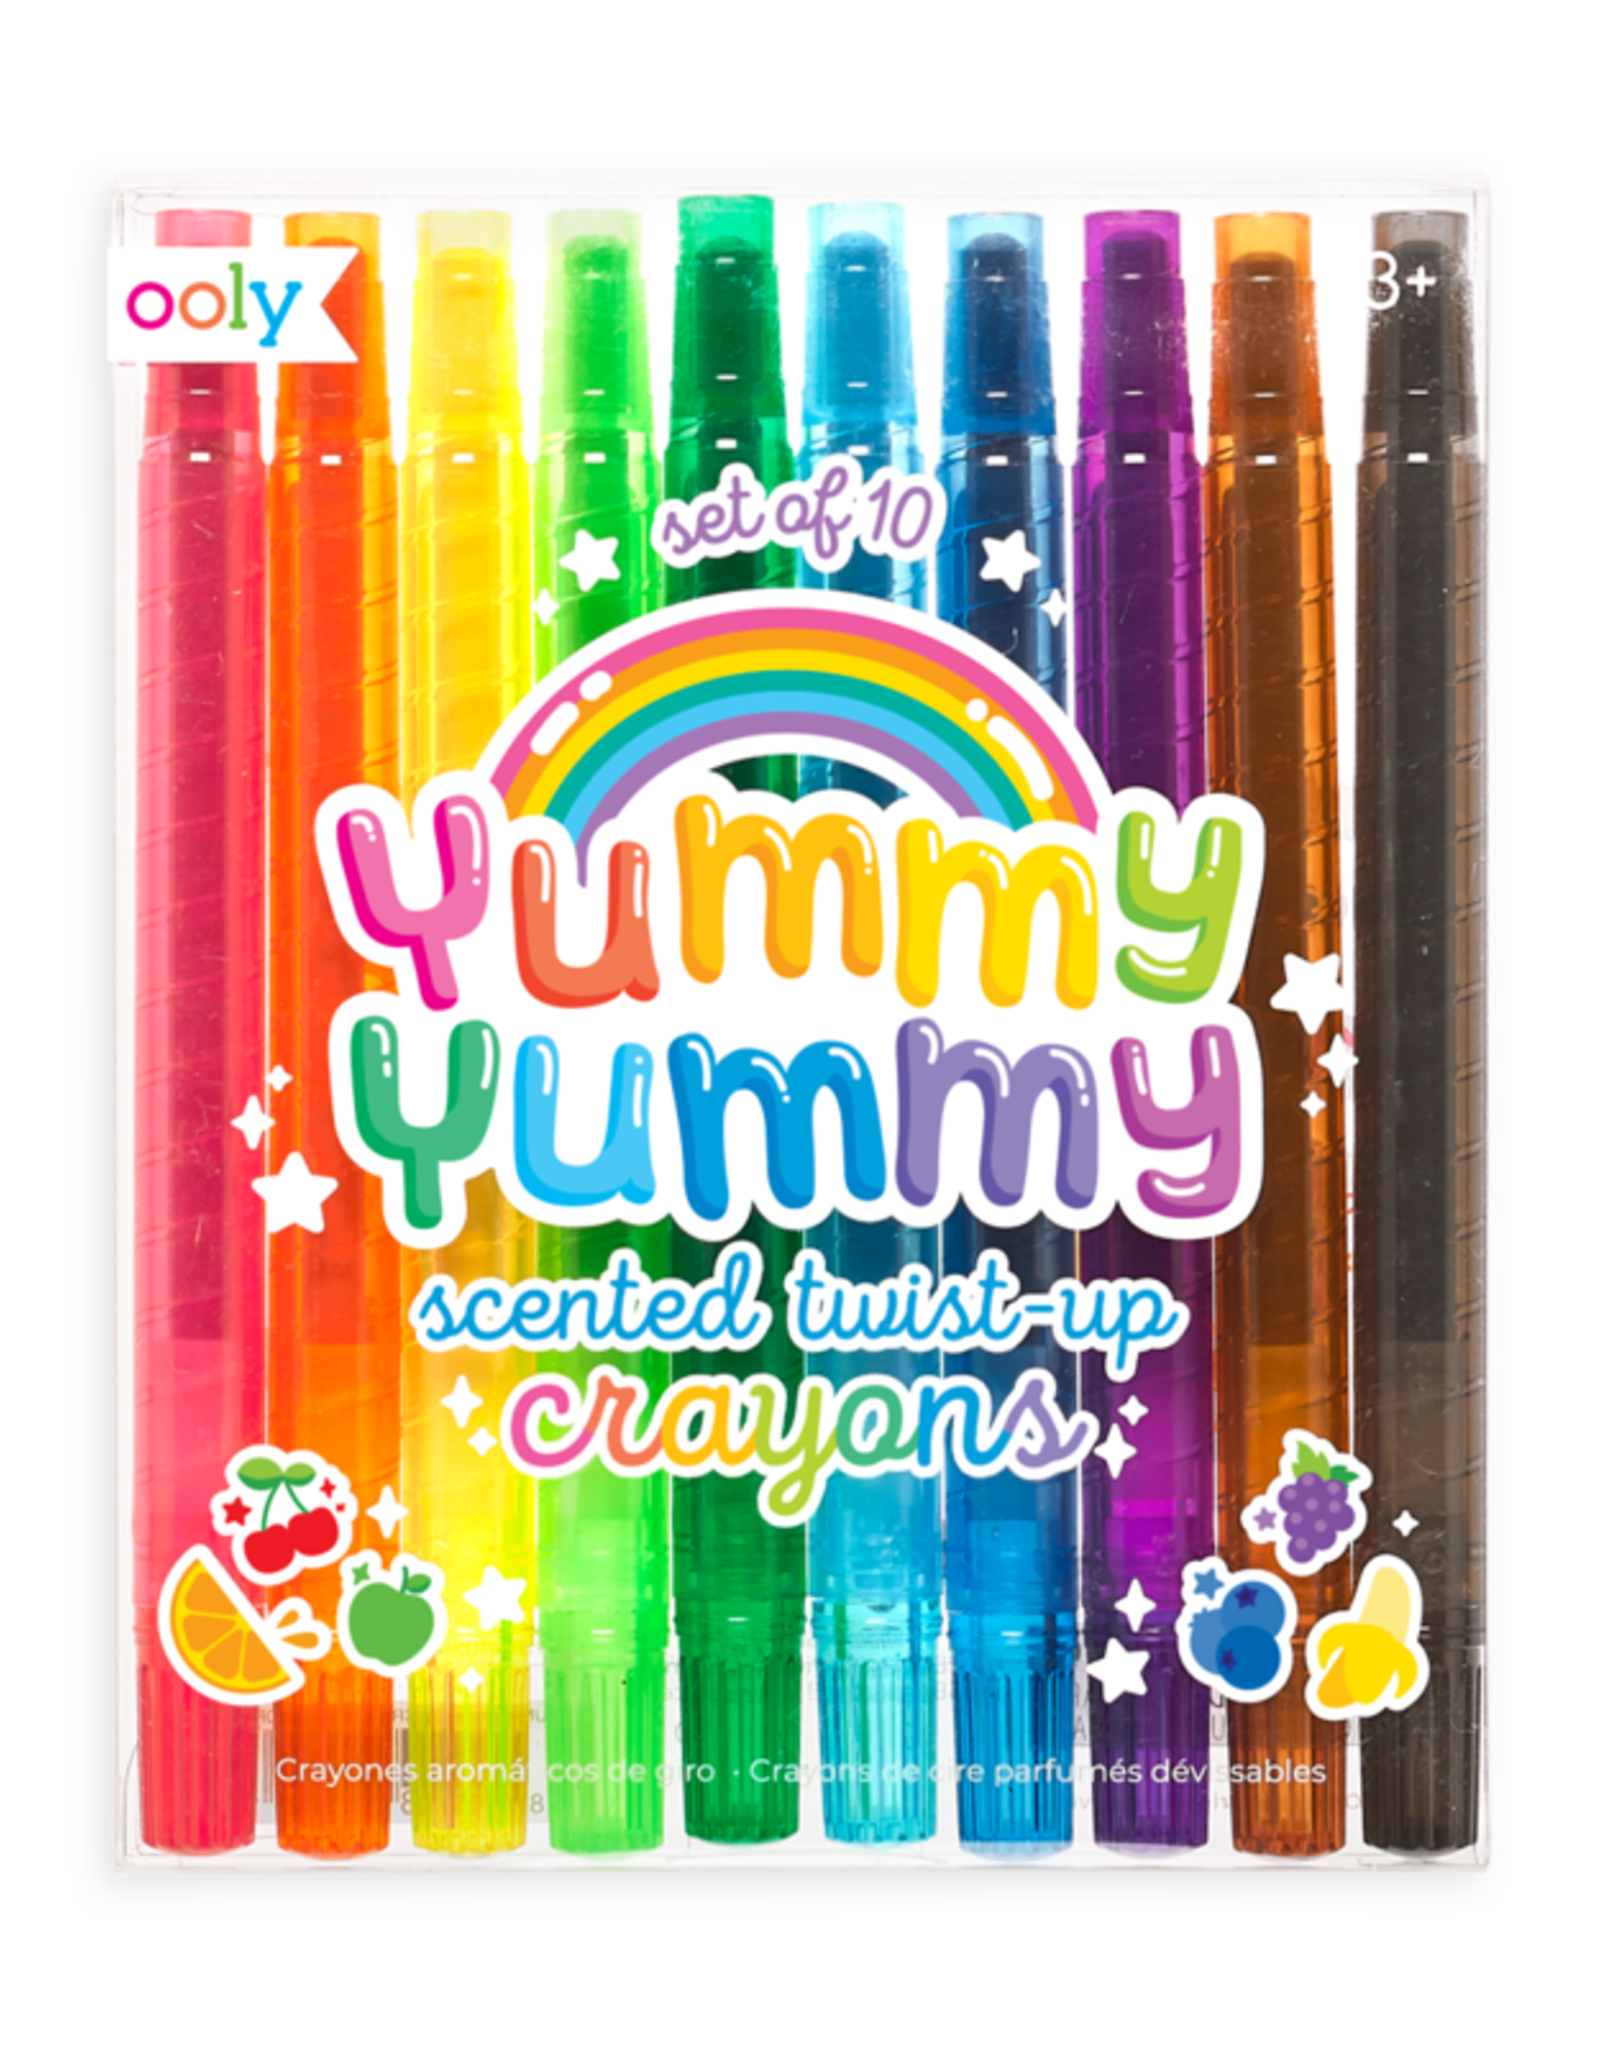 OOLY YUMMY YUMMY SCENTED TWIST UP CRAYONS - SET OF 10